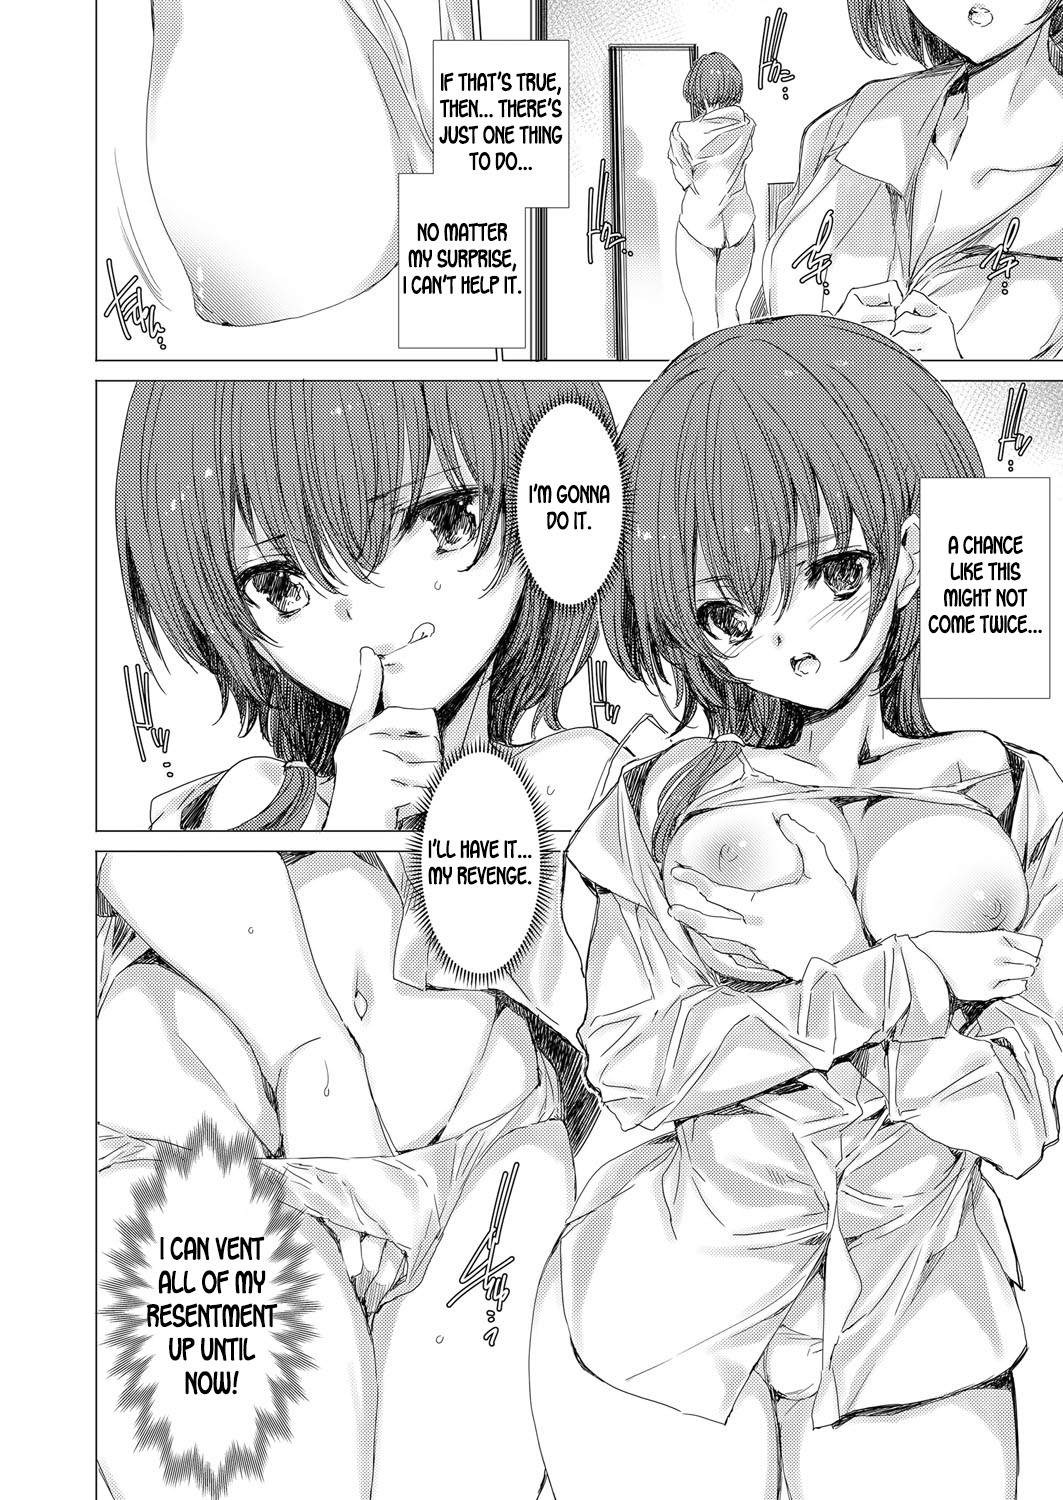 Hentai Manga Comic-Younger Sister Rape Revenge Quest ~Doing as I Please With the Takeover of Her Virtual and Real Body~ Level 1-Read-2